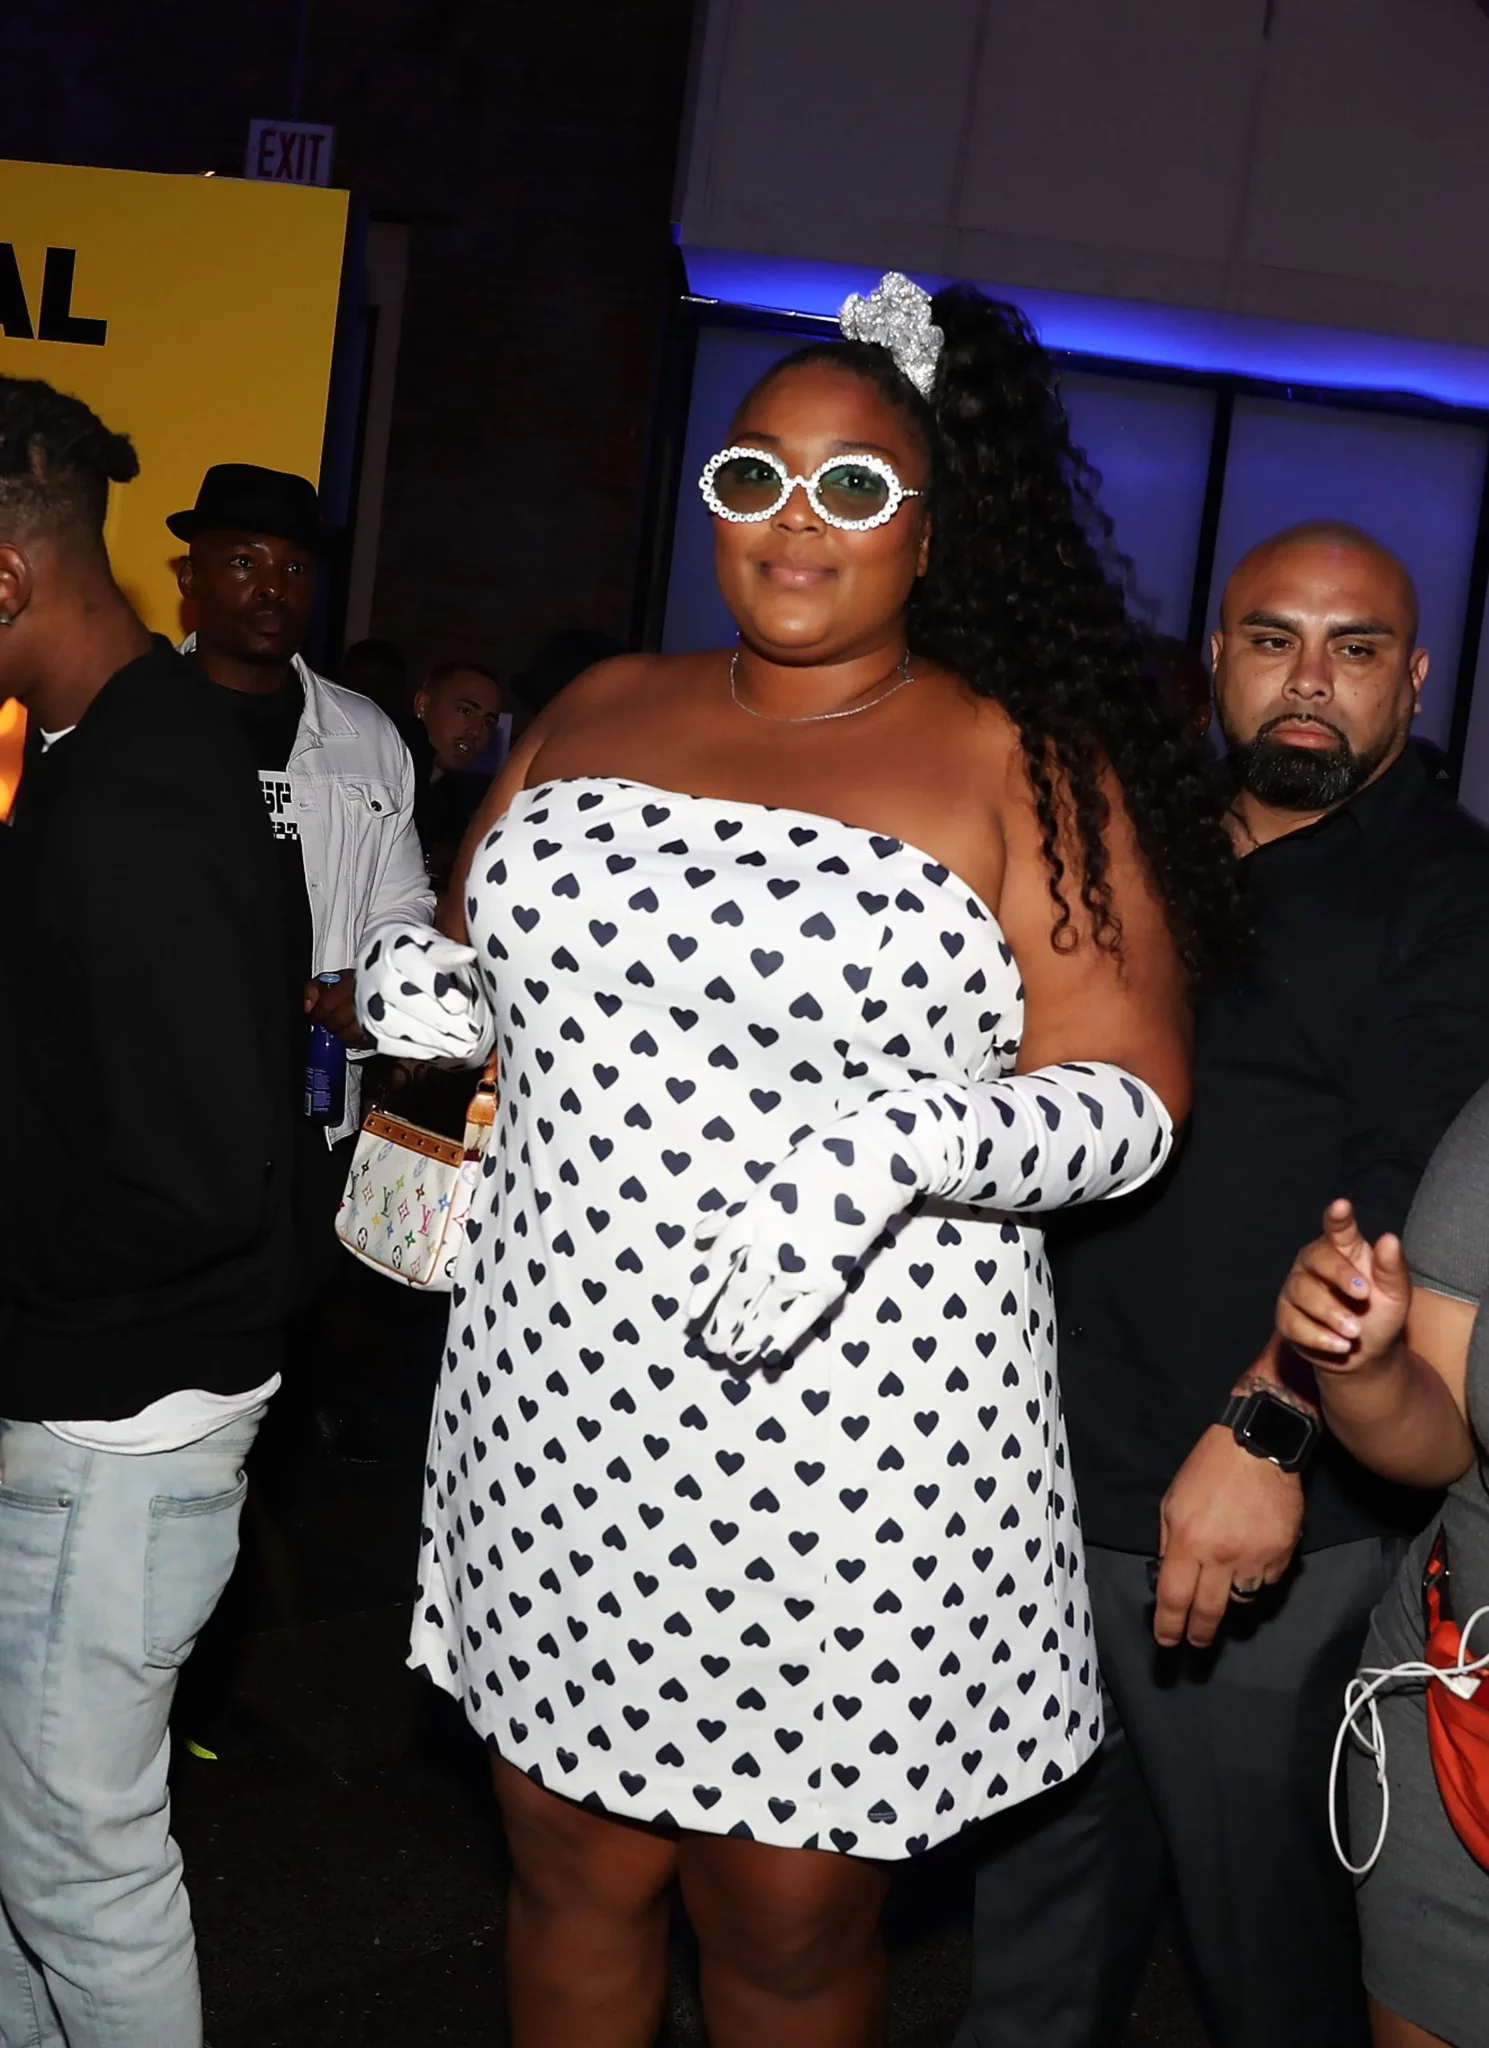 Lizzo in a dress full of hearts.